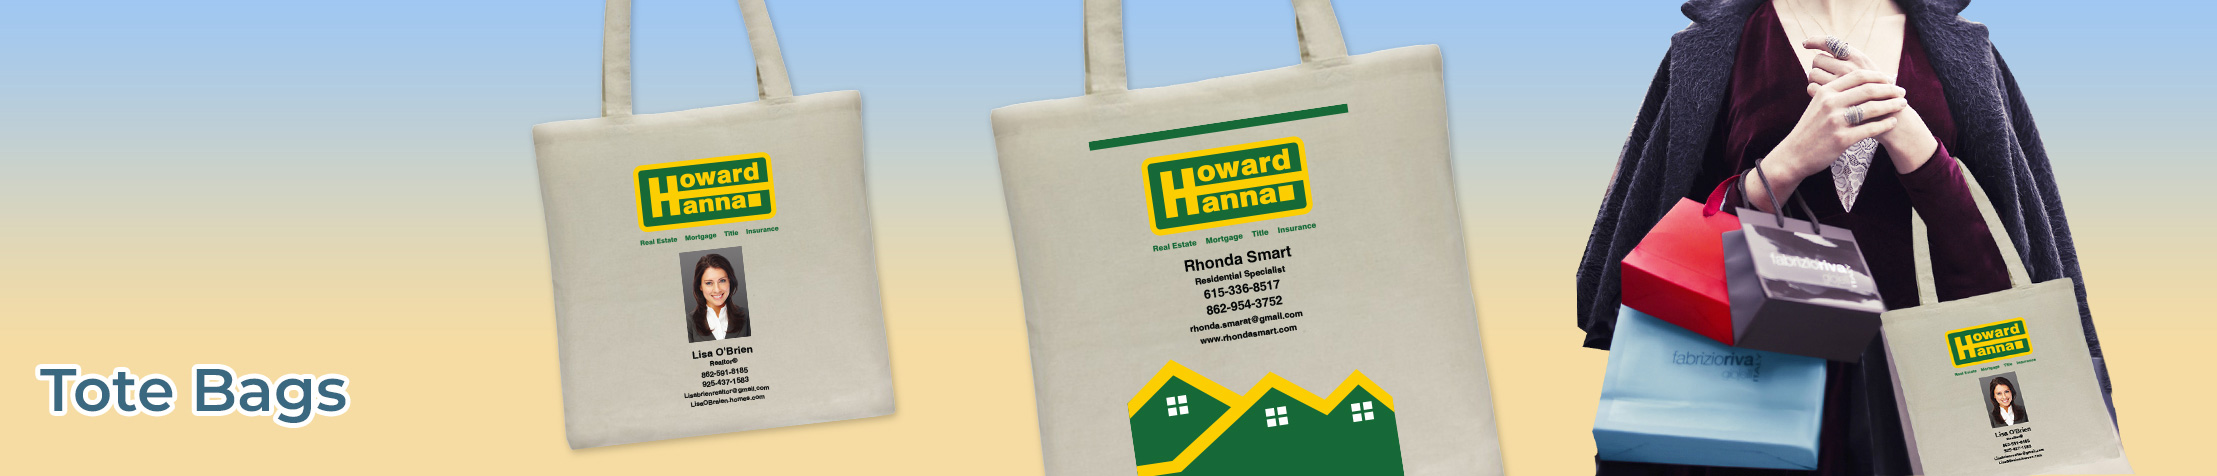 Howard Hanna Real Estate Tote Bags - Howard Hanna  personalized realtor promotional products | BestPrintBuy.com